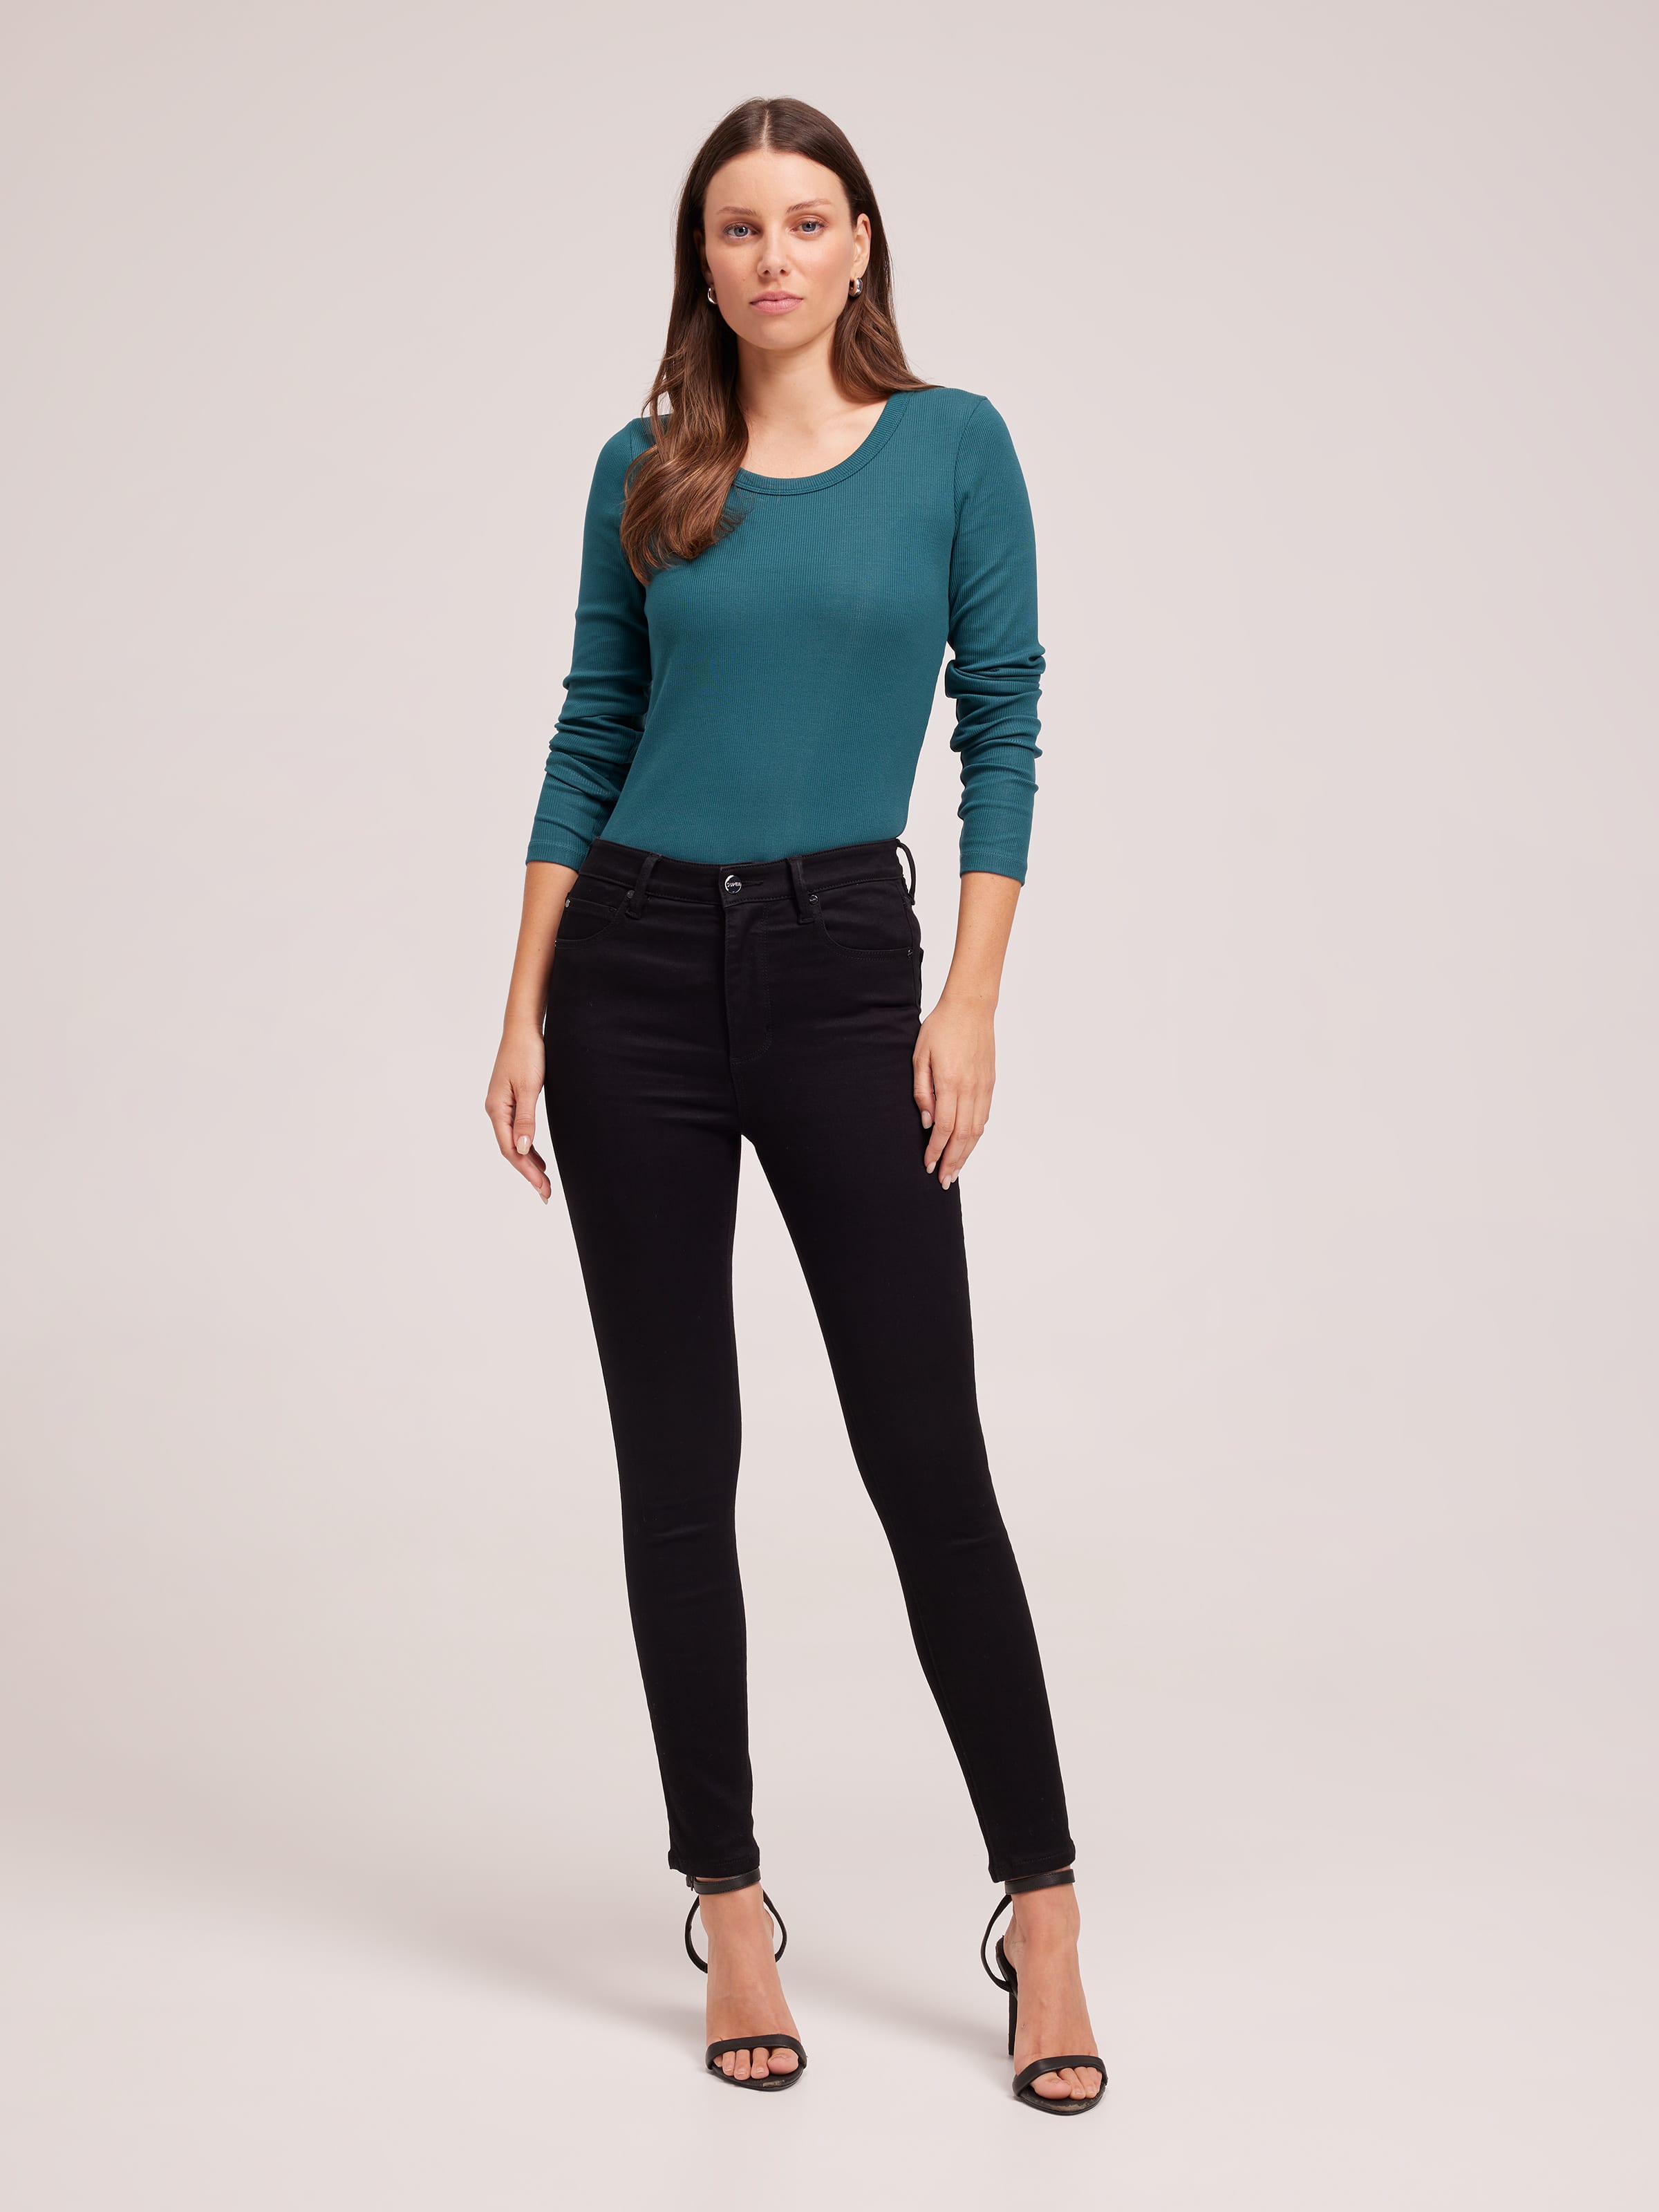 Plus 10 High-Rise Skinny Jeans in Black Frost